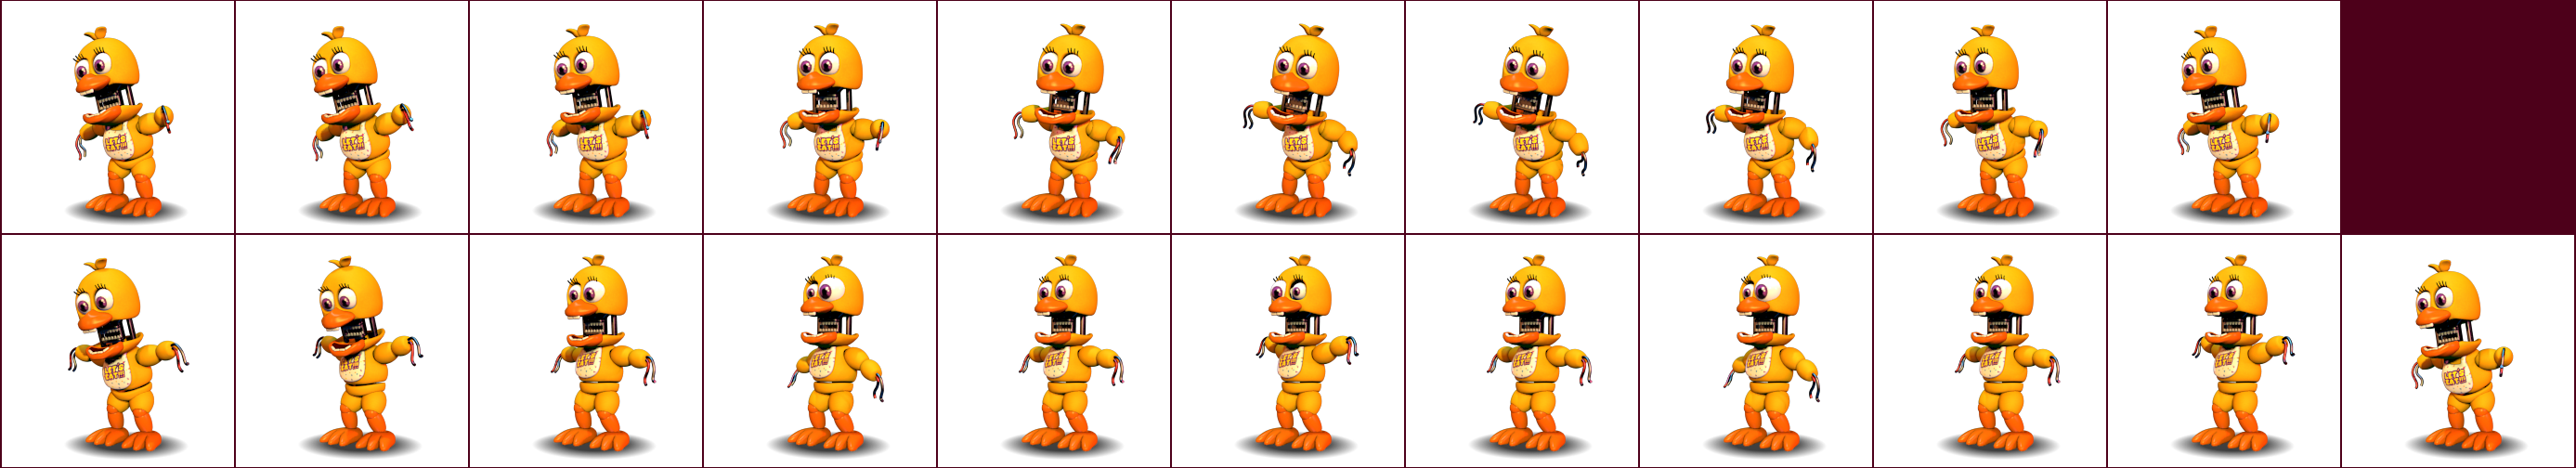 FNaF World - Withered Chica